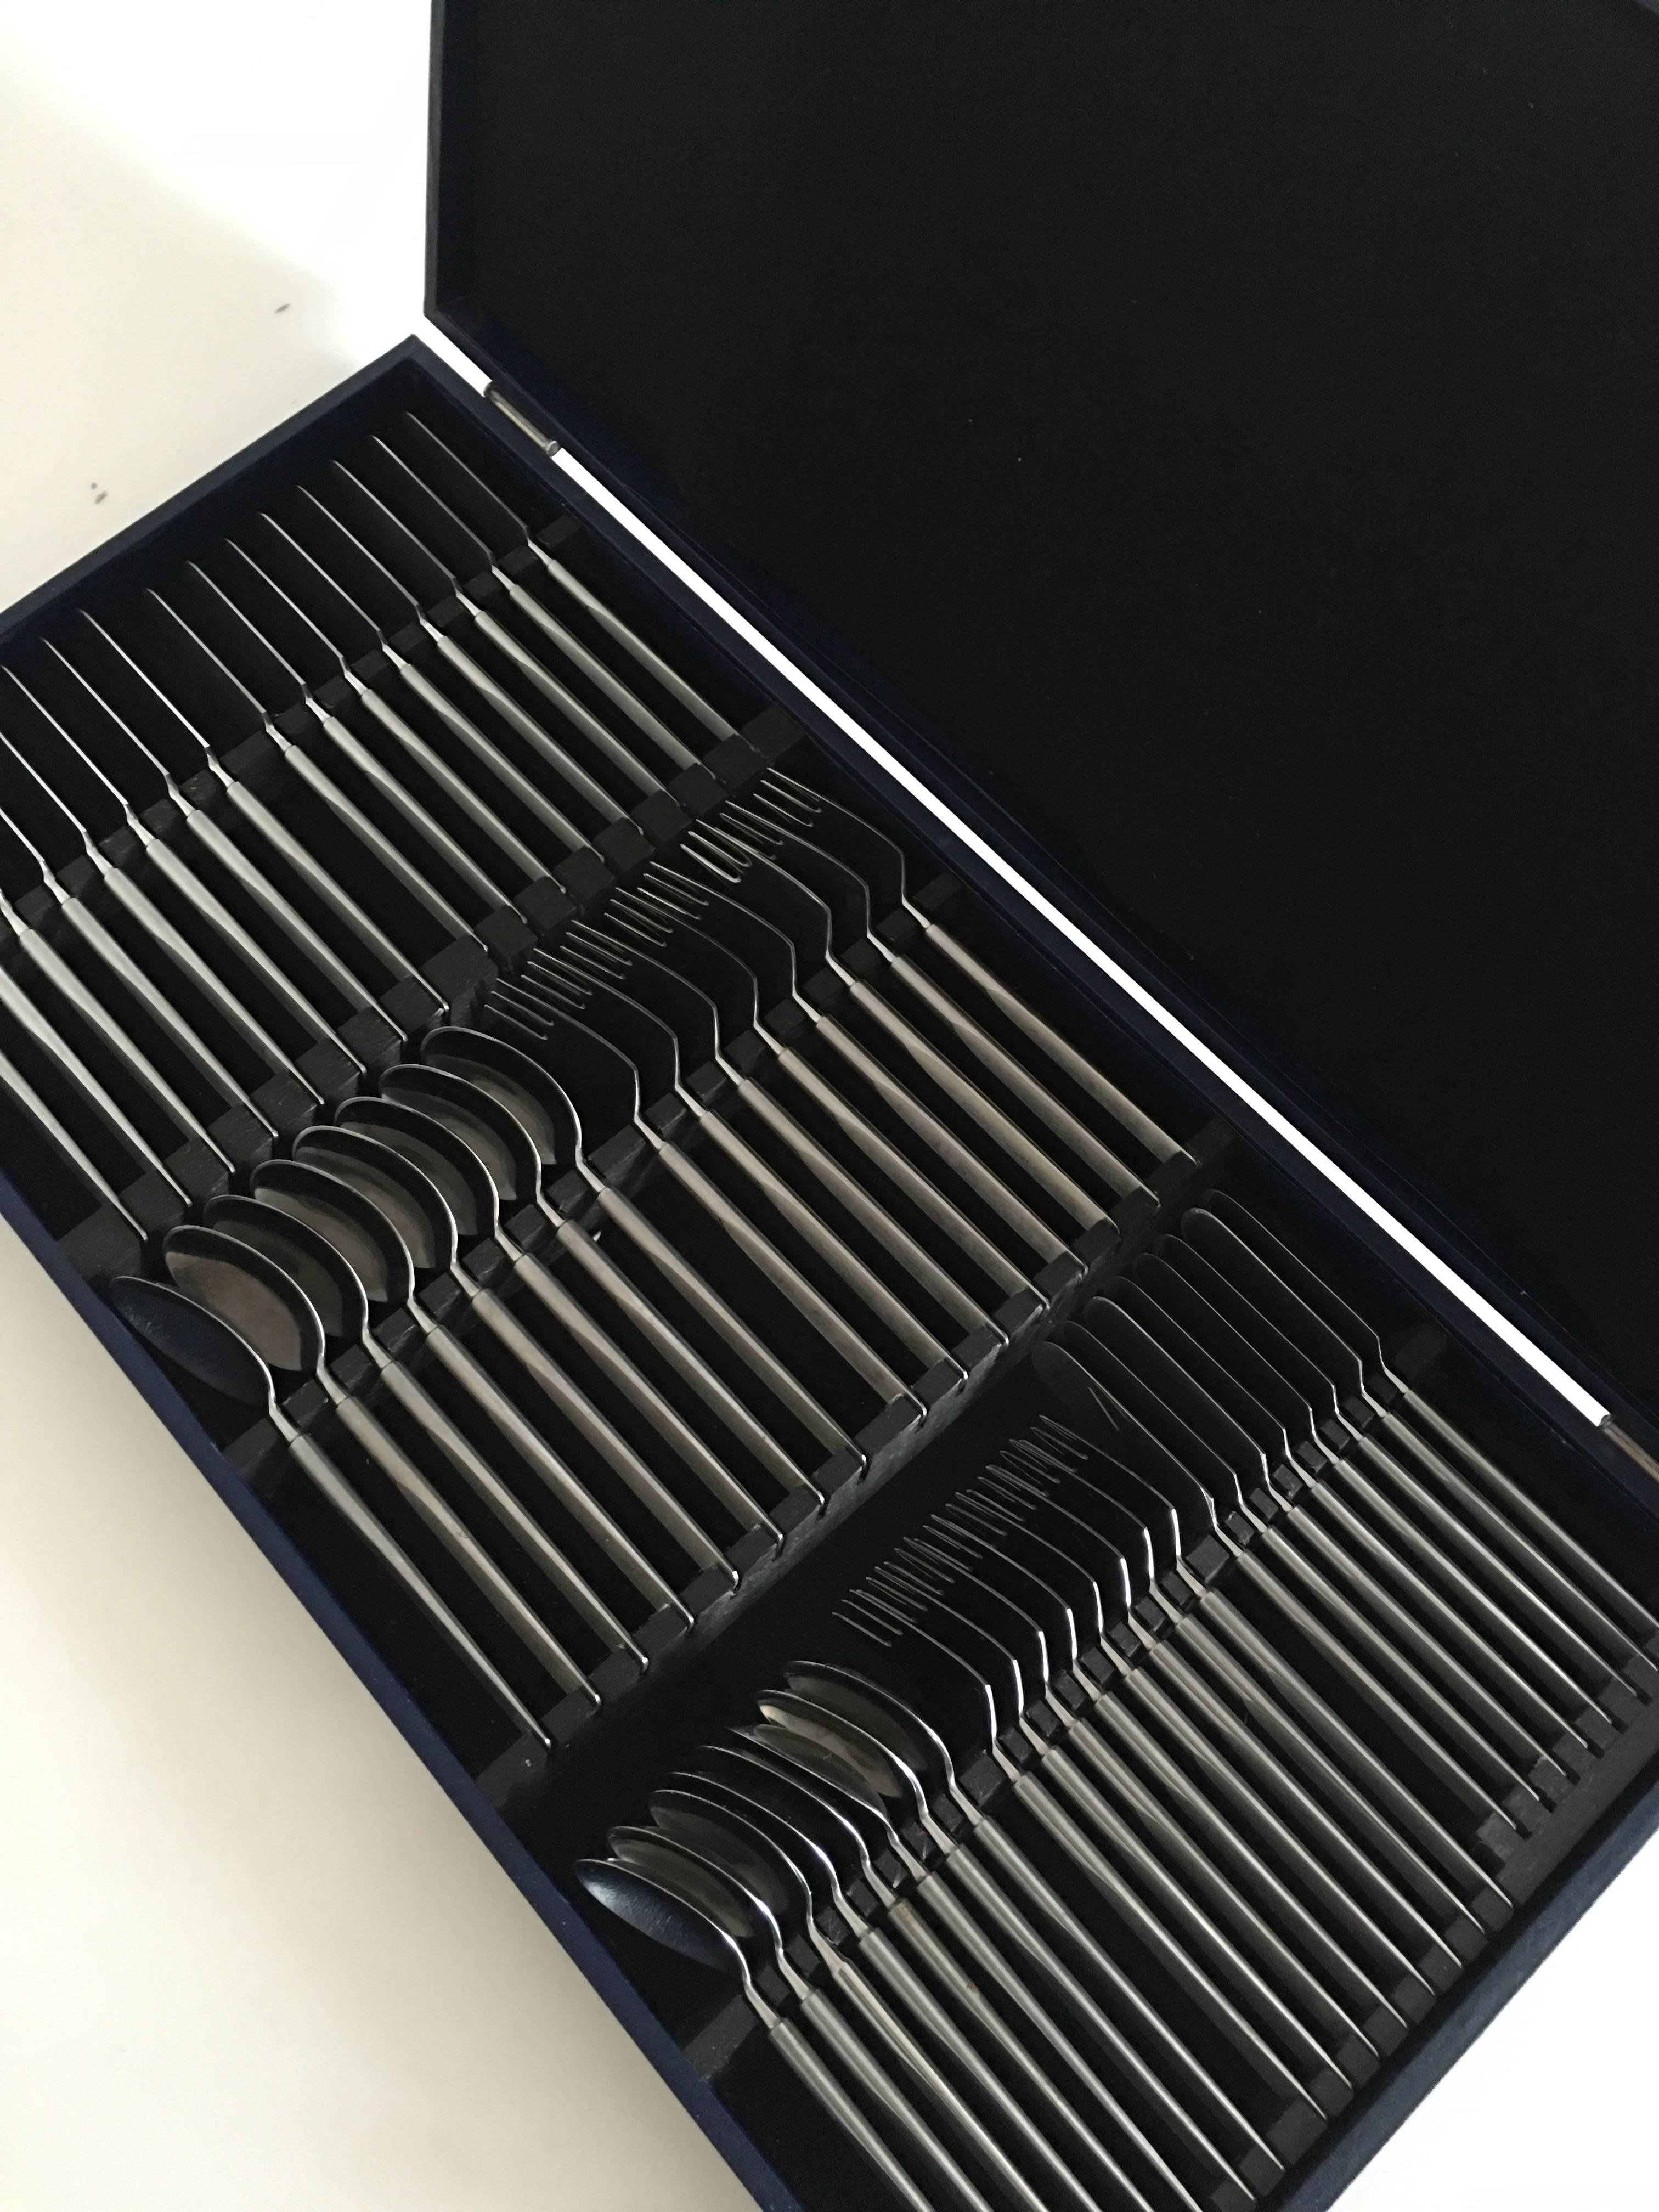 Erik Herlöw stainless steel flatware obelisk set of 56 pieces. 

Eight dinner knives.
Eight luncheon knives.
Eight dinner spoons.
Eight dinner forks.
Eight dessert spoons.
Eight luncheon forks.
Eight butter knives.

The set comes with the